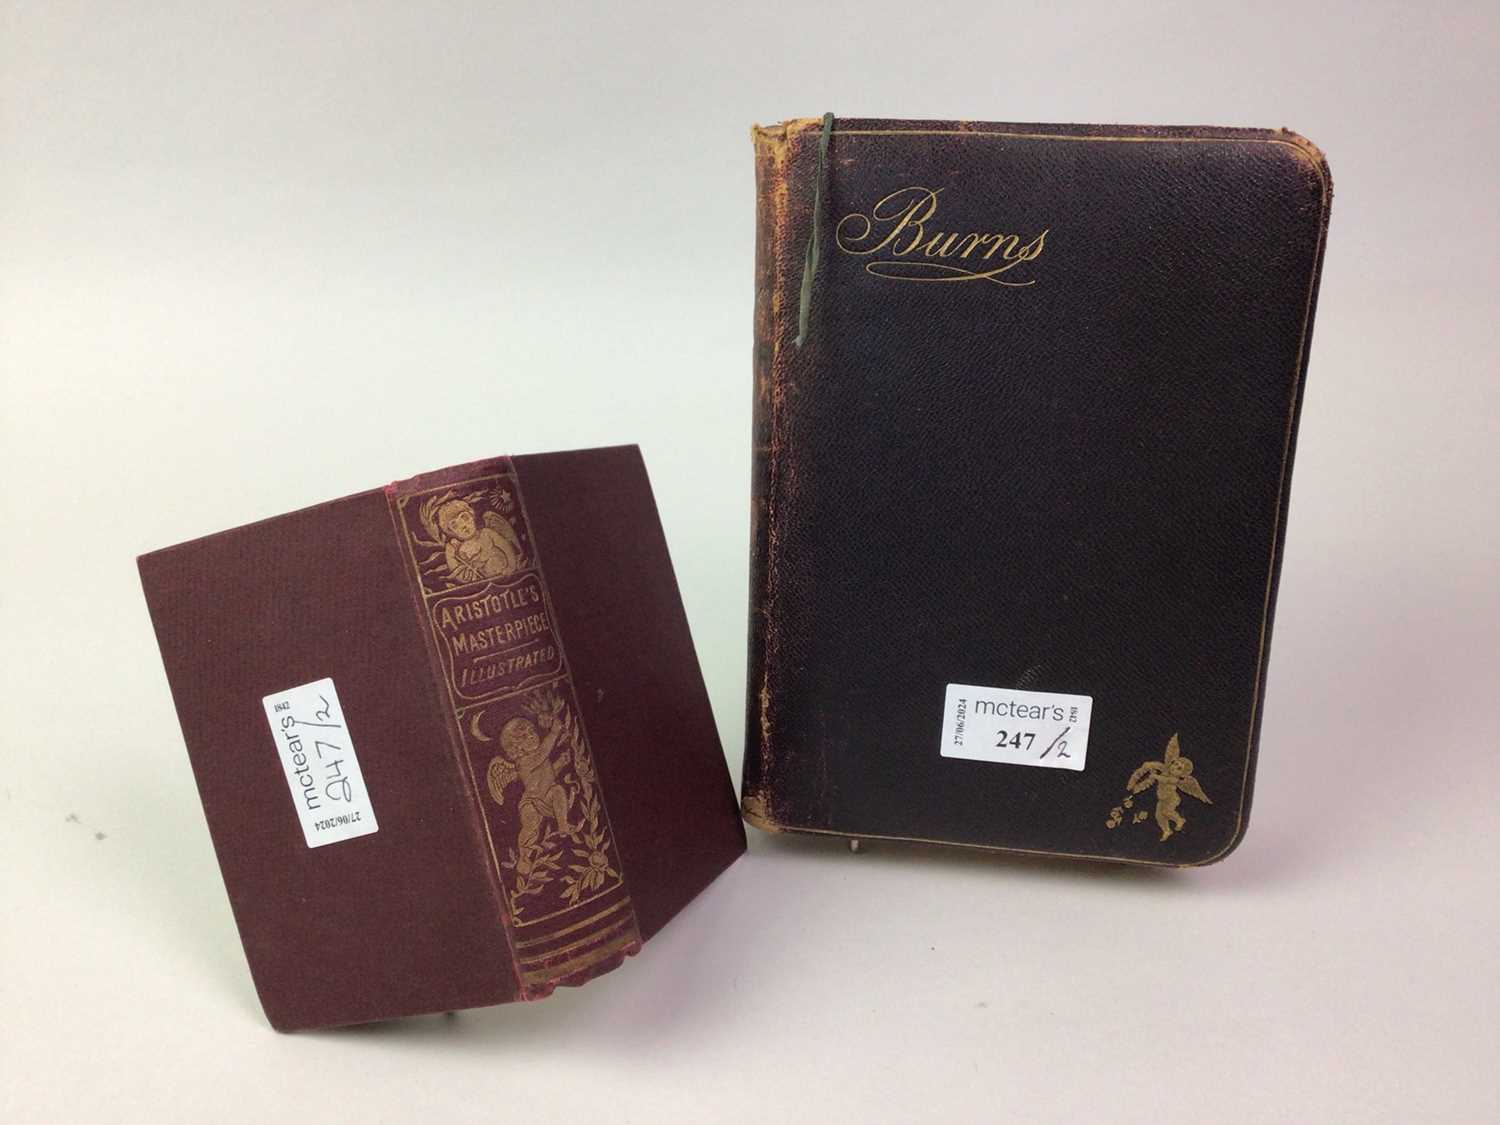 Lot 247 - THE POETICAL WORKS AND LETTERS OF ROBERT BURNS